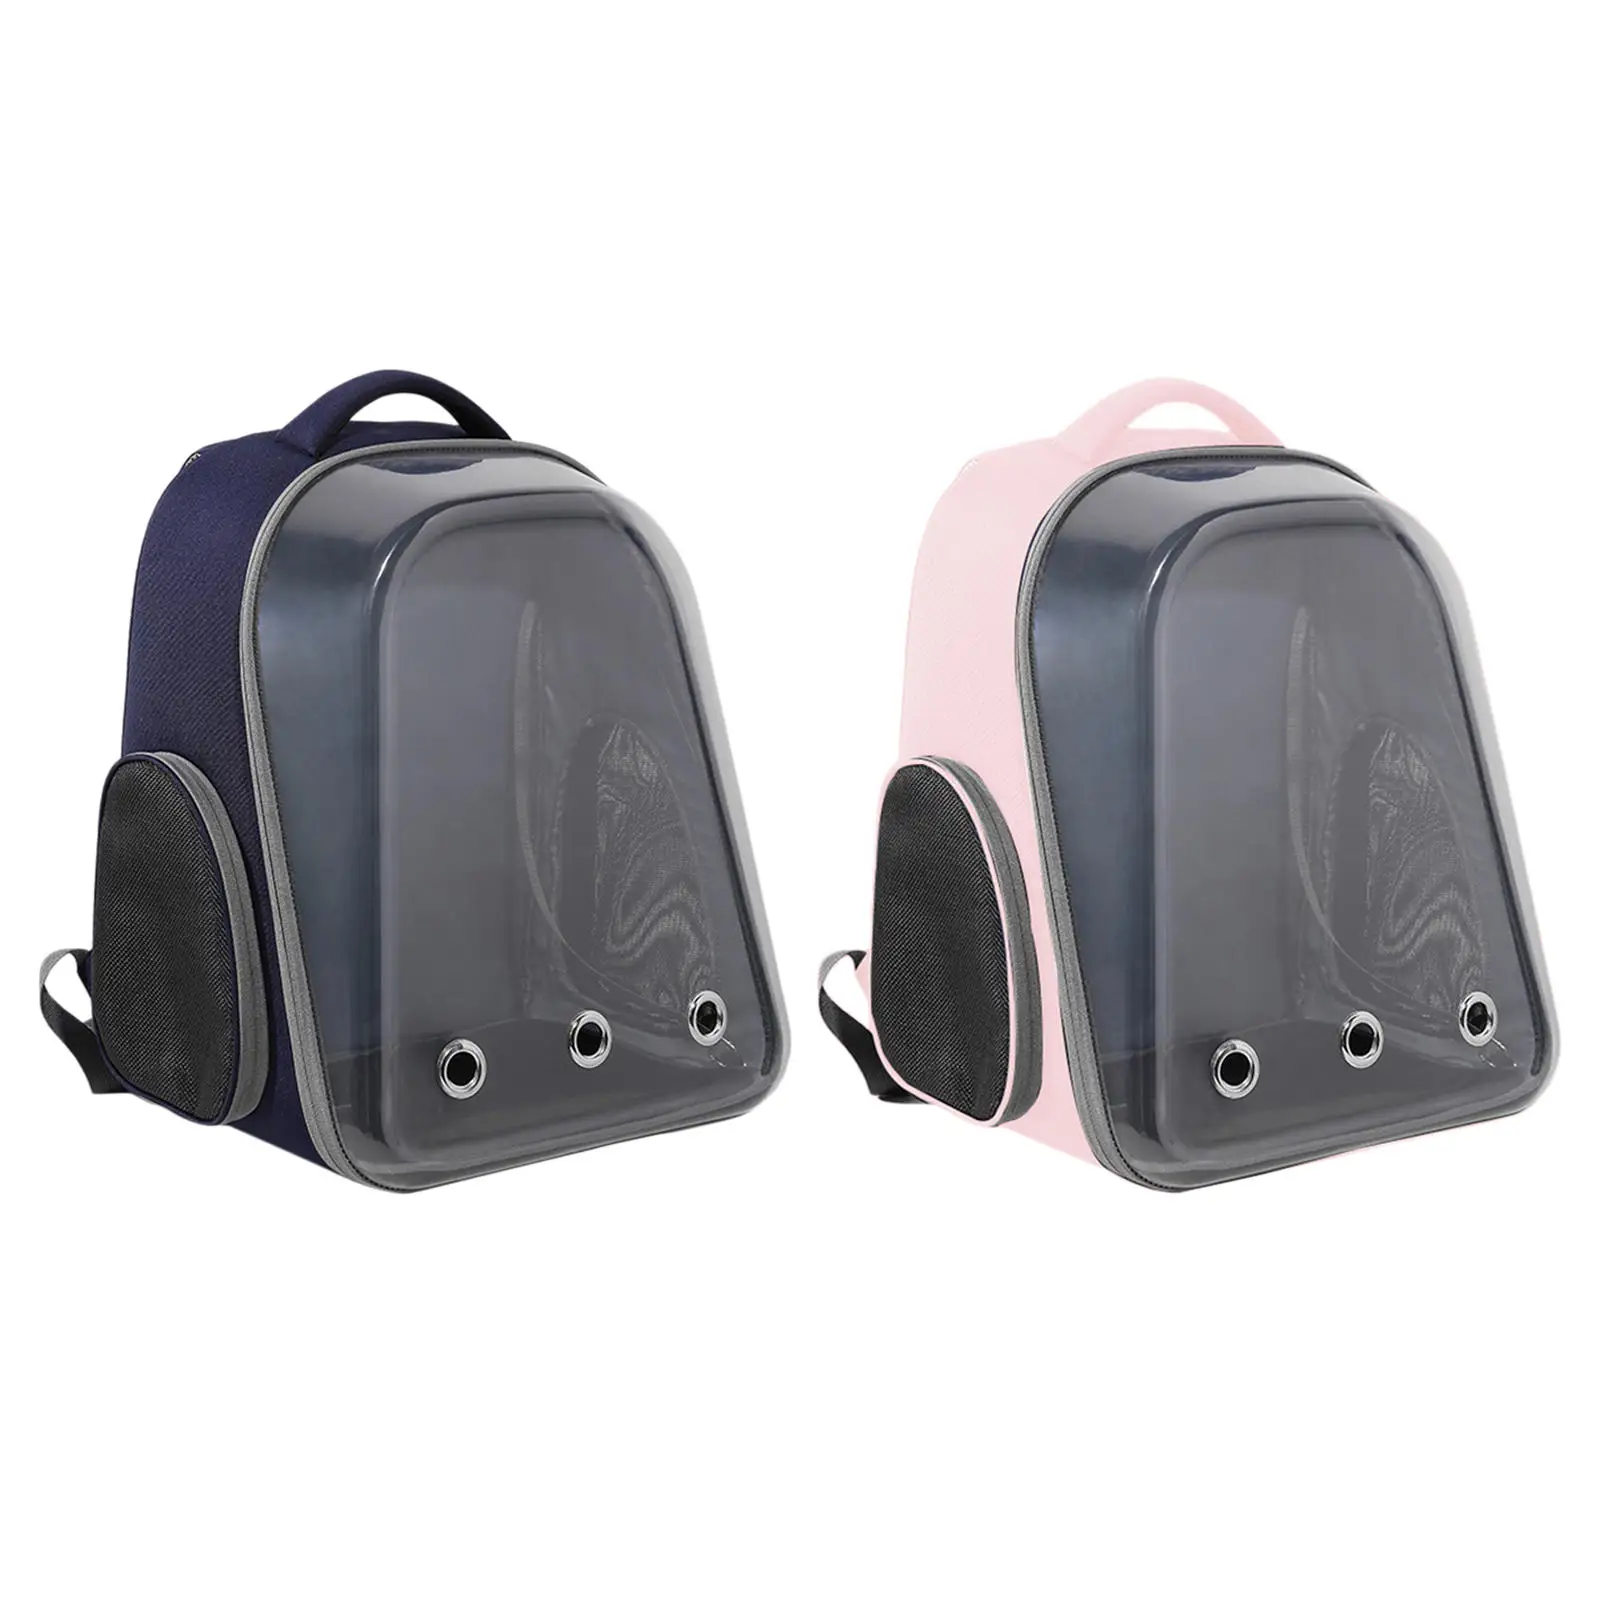 Comfortable Pet Dog&Cat Carrier Backpack Handbag for Small Cute Cat Dog Travel Hiking Use